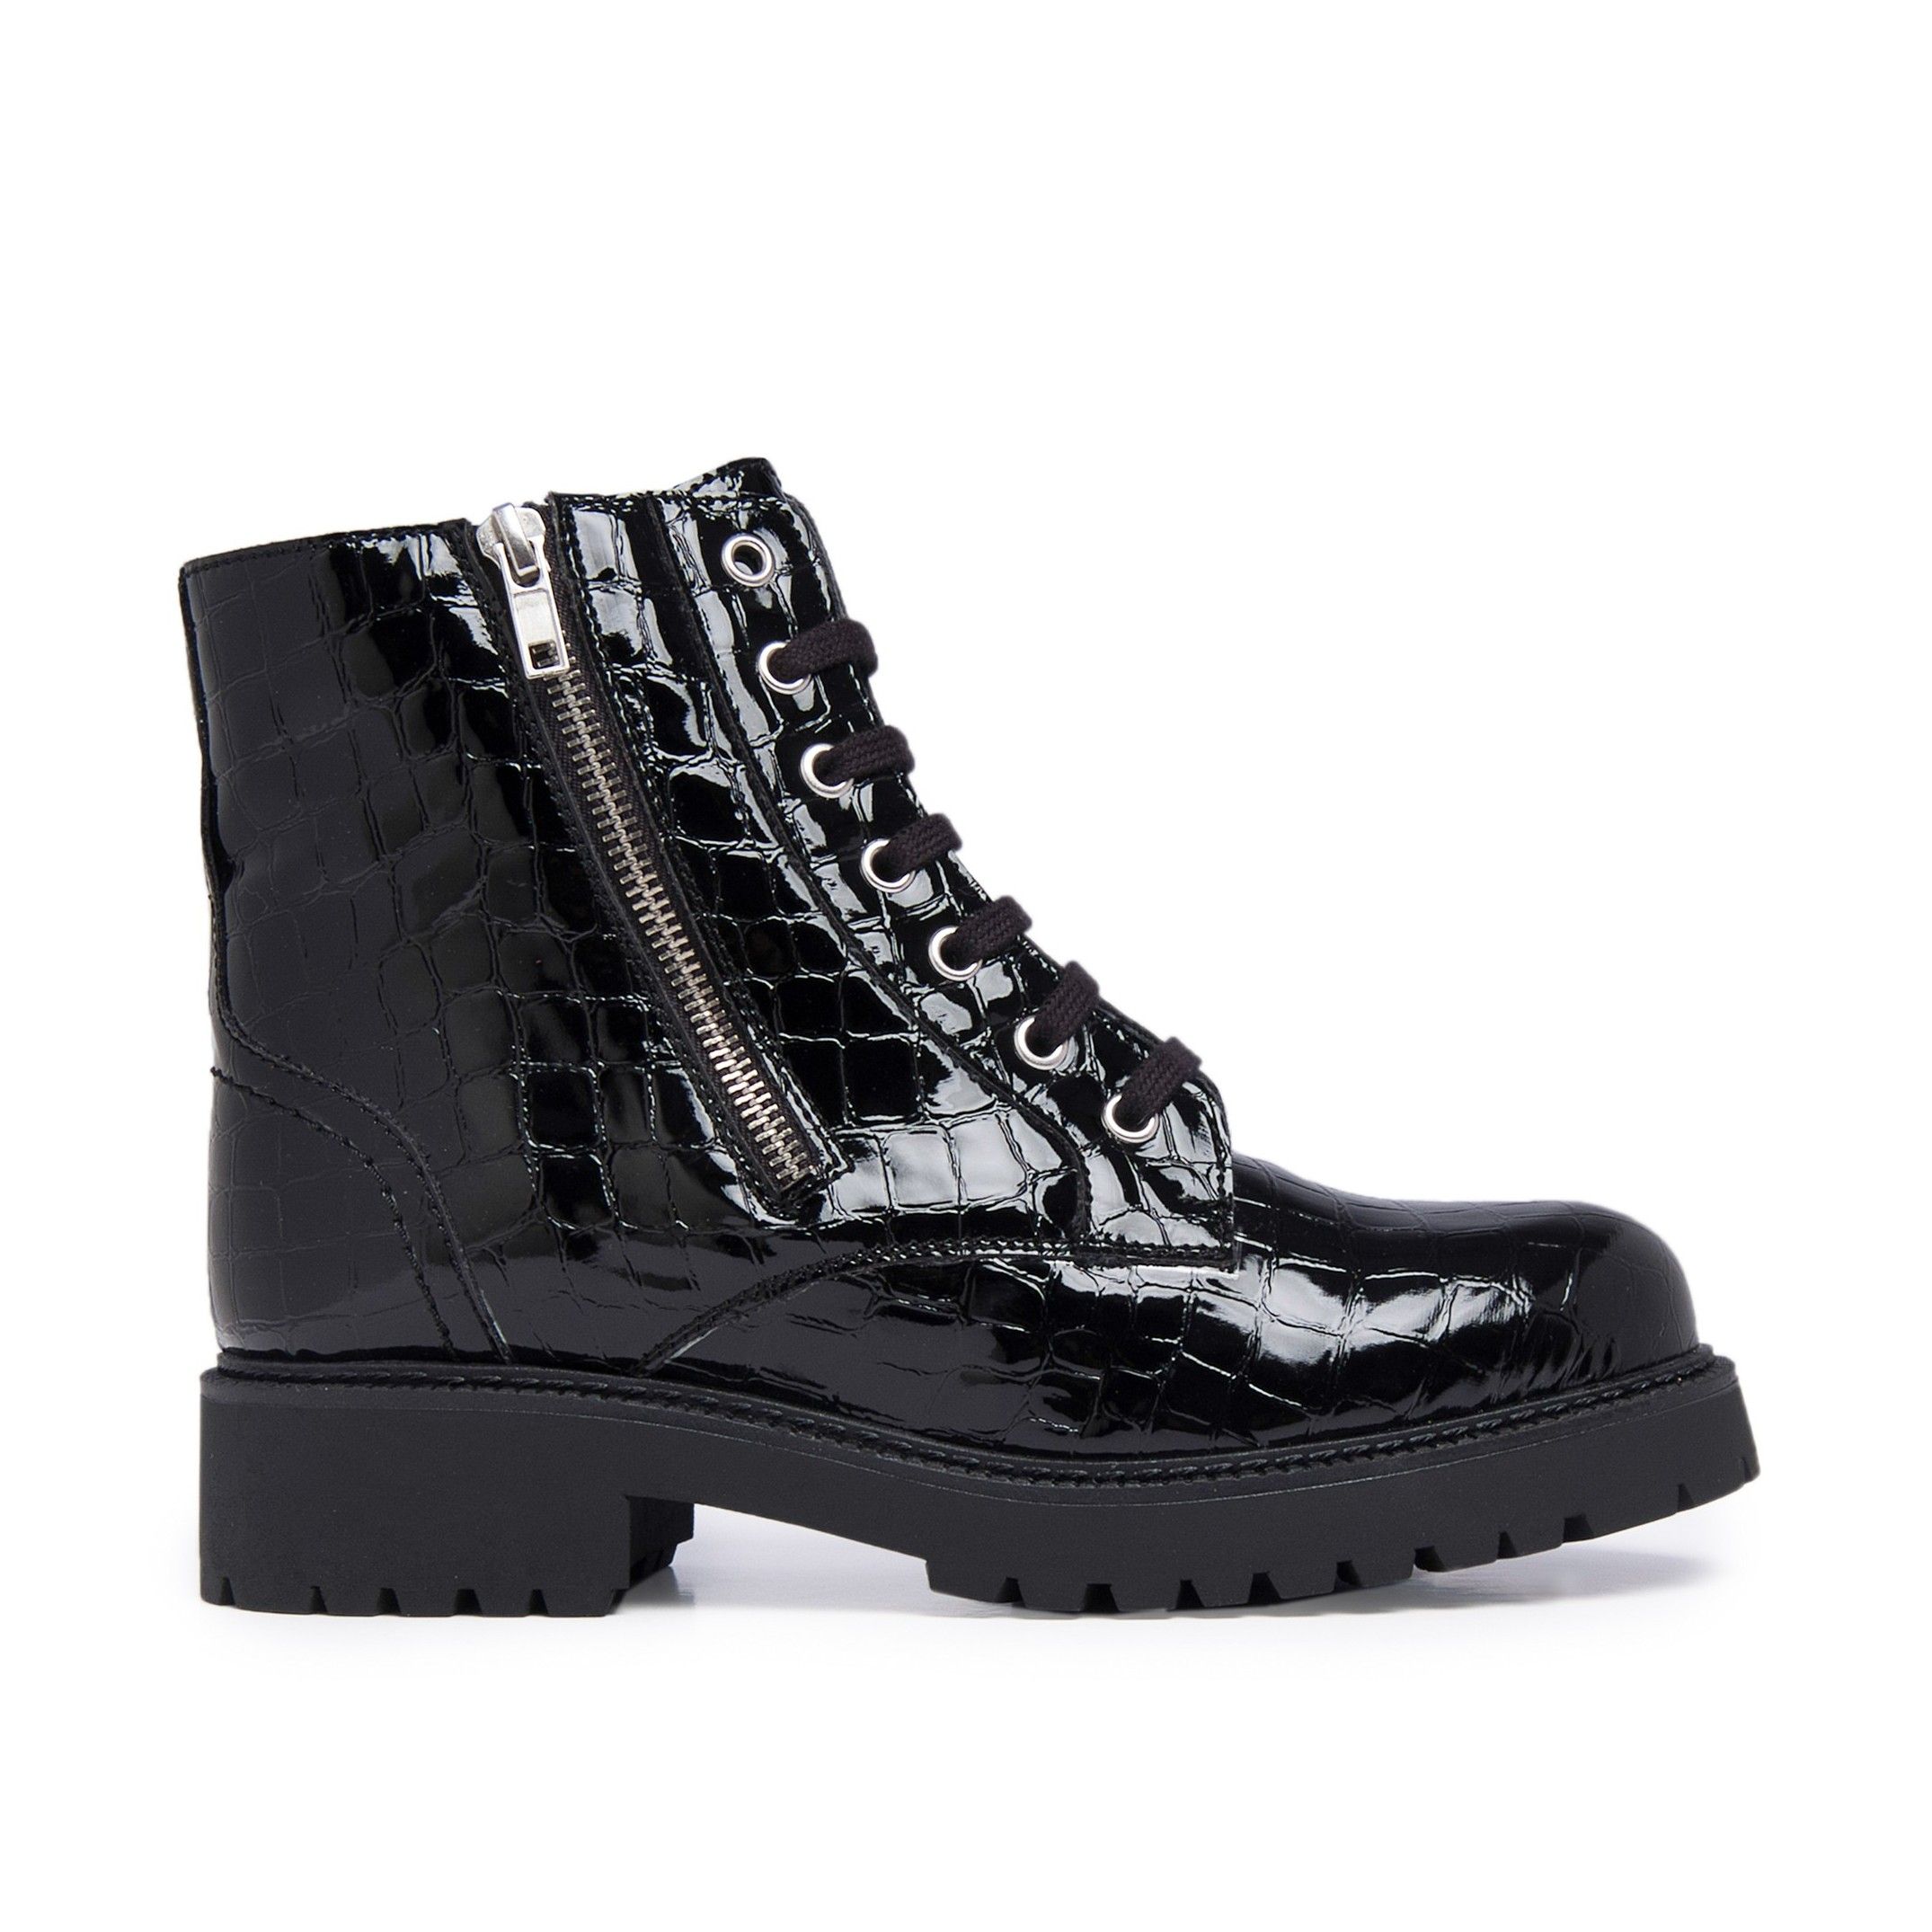 Leather boots with laces closure. Brand: María Barceló. Adjustable closure with laces and outer side zipper. Upper made of synthetic material. Inner and insole made of leather. Sole: TR non-slip. Platform: 3 cm Heel: 5 cm Made in Spain.